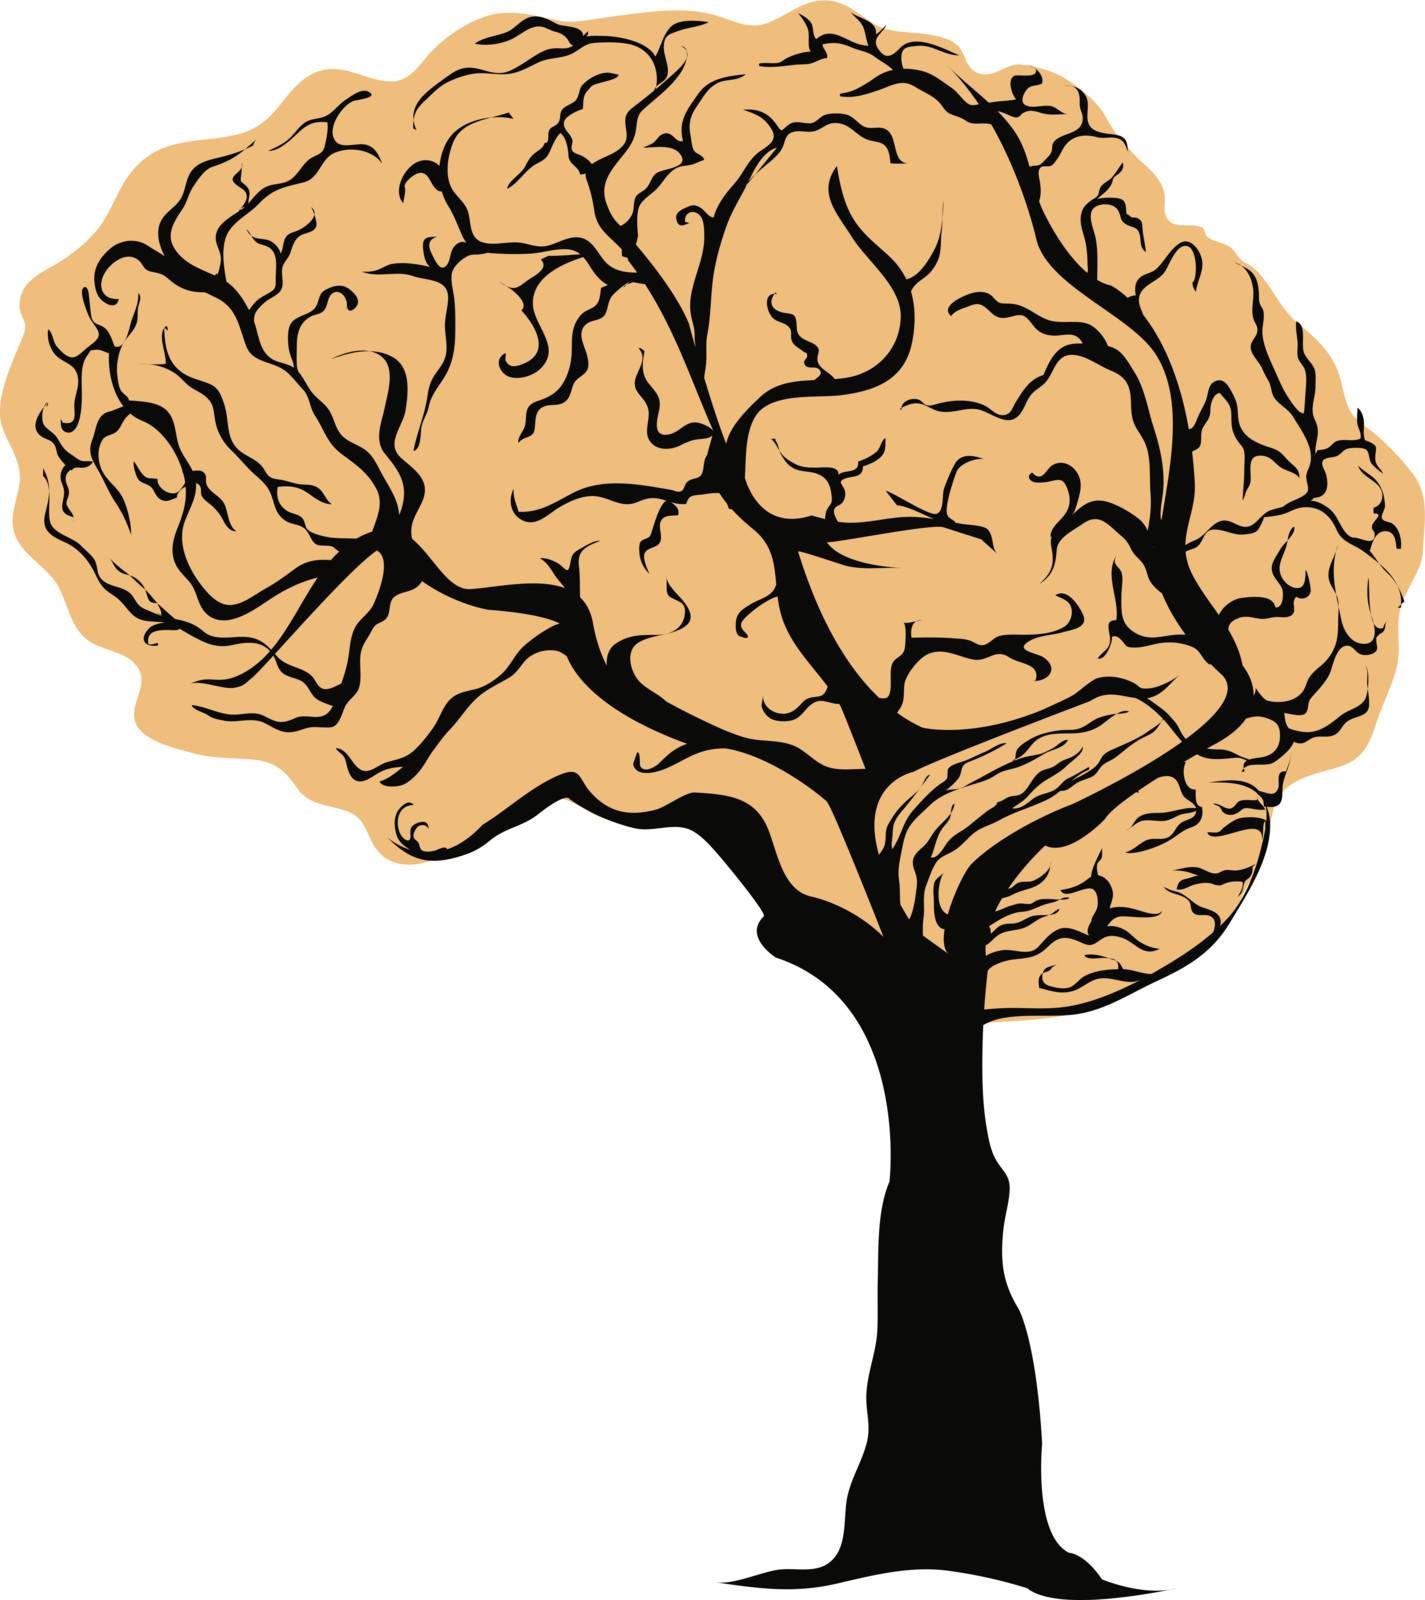 vector illustration of a brain in a tree form